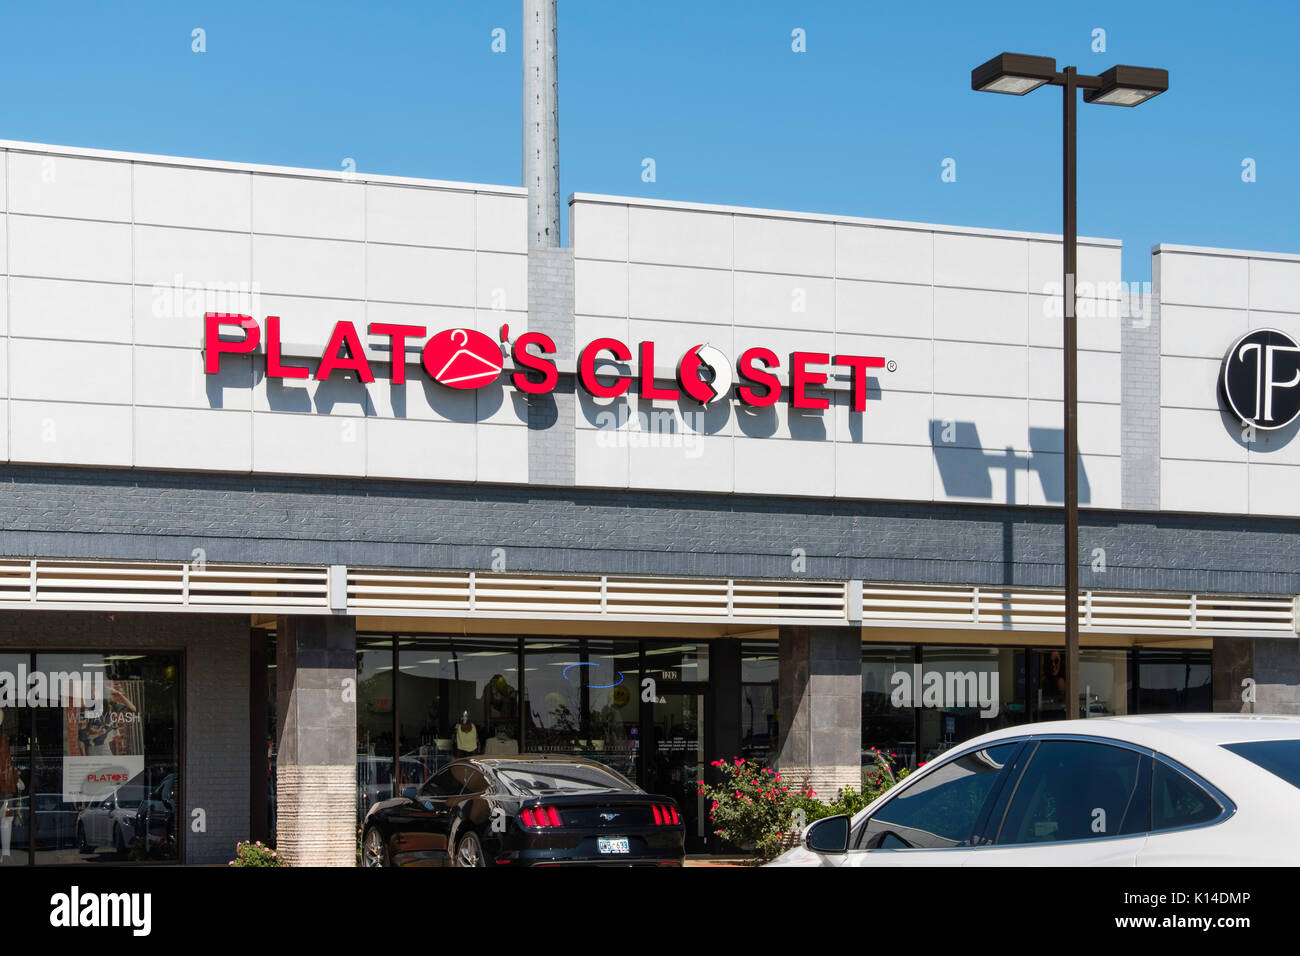 Plato's Closet buys and sells gently used clothing for teens and twenty-something boys and girls. Exterior storefront, Norman, Oklahoma, USA. Stock Photo